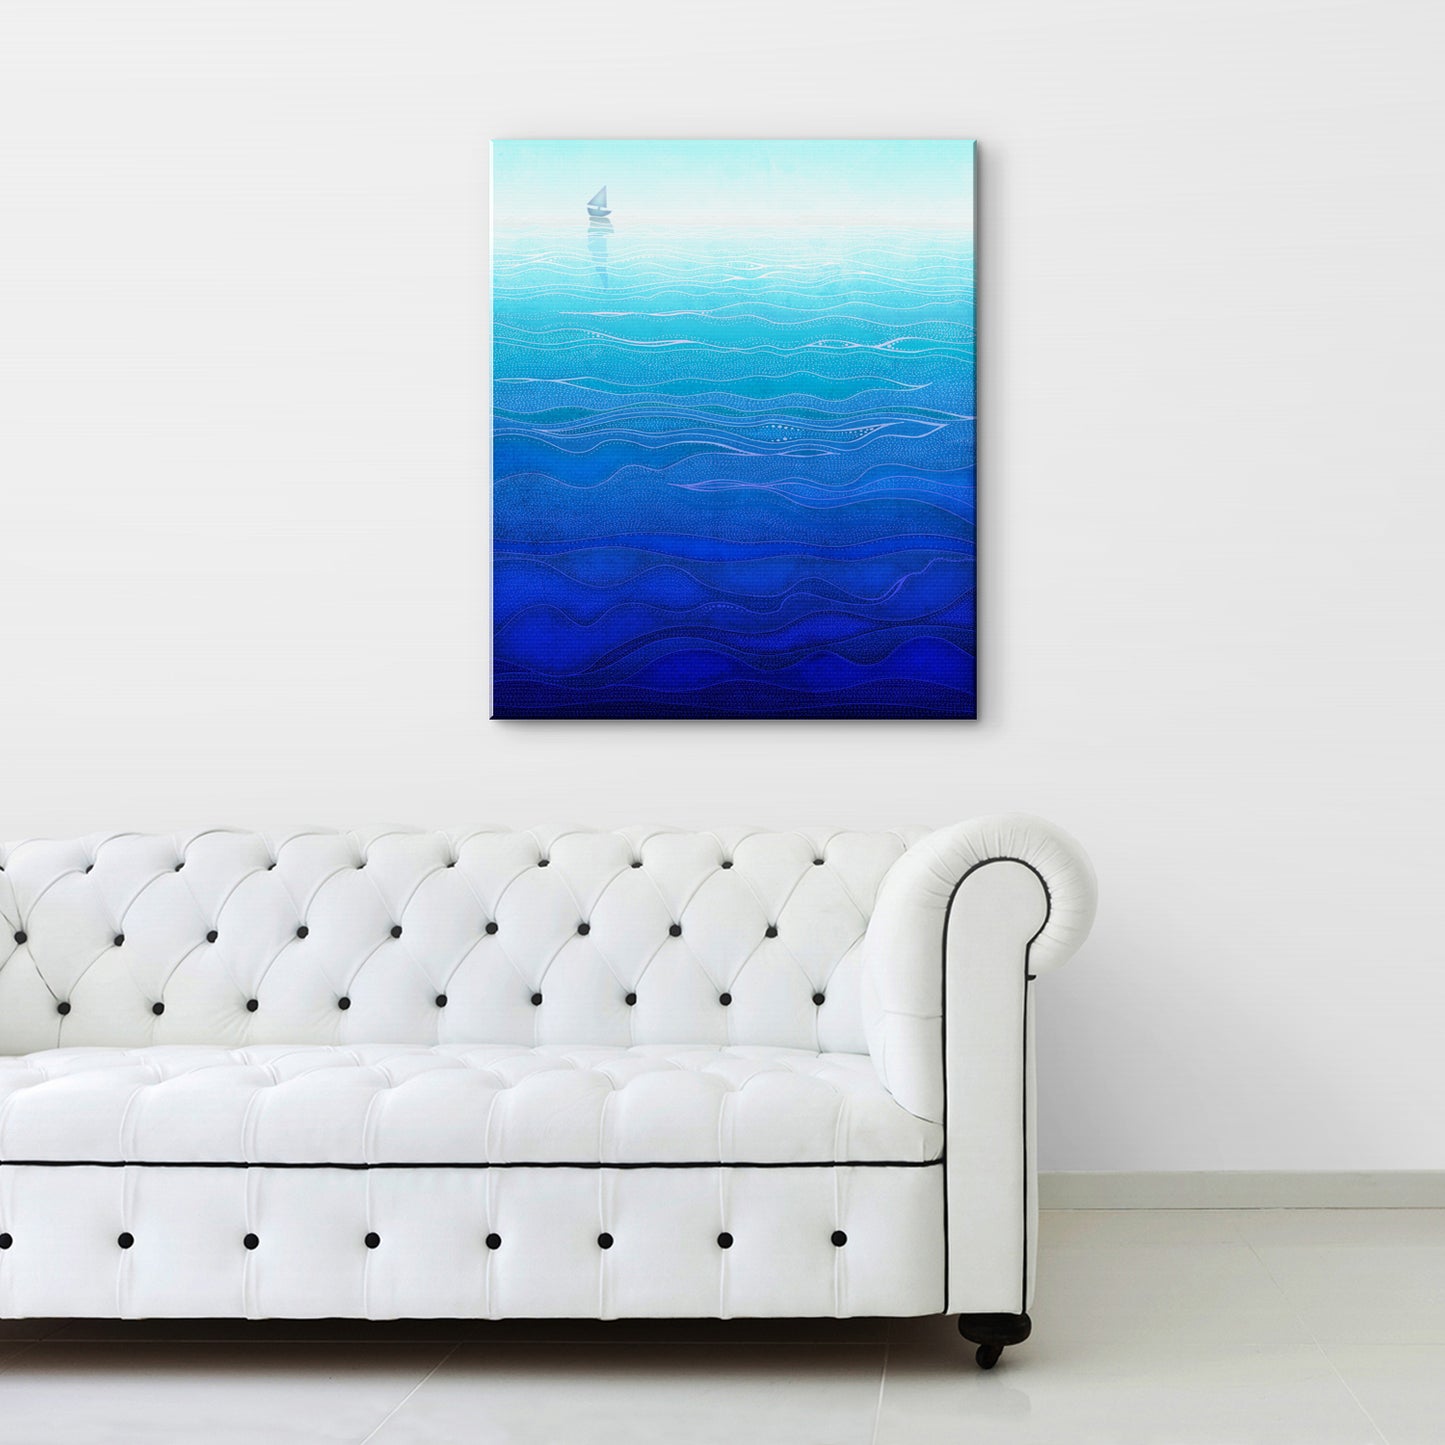 Lonely way - Canvas Art Print